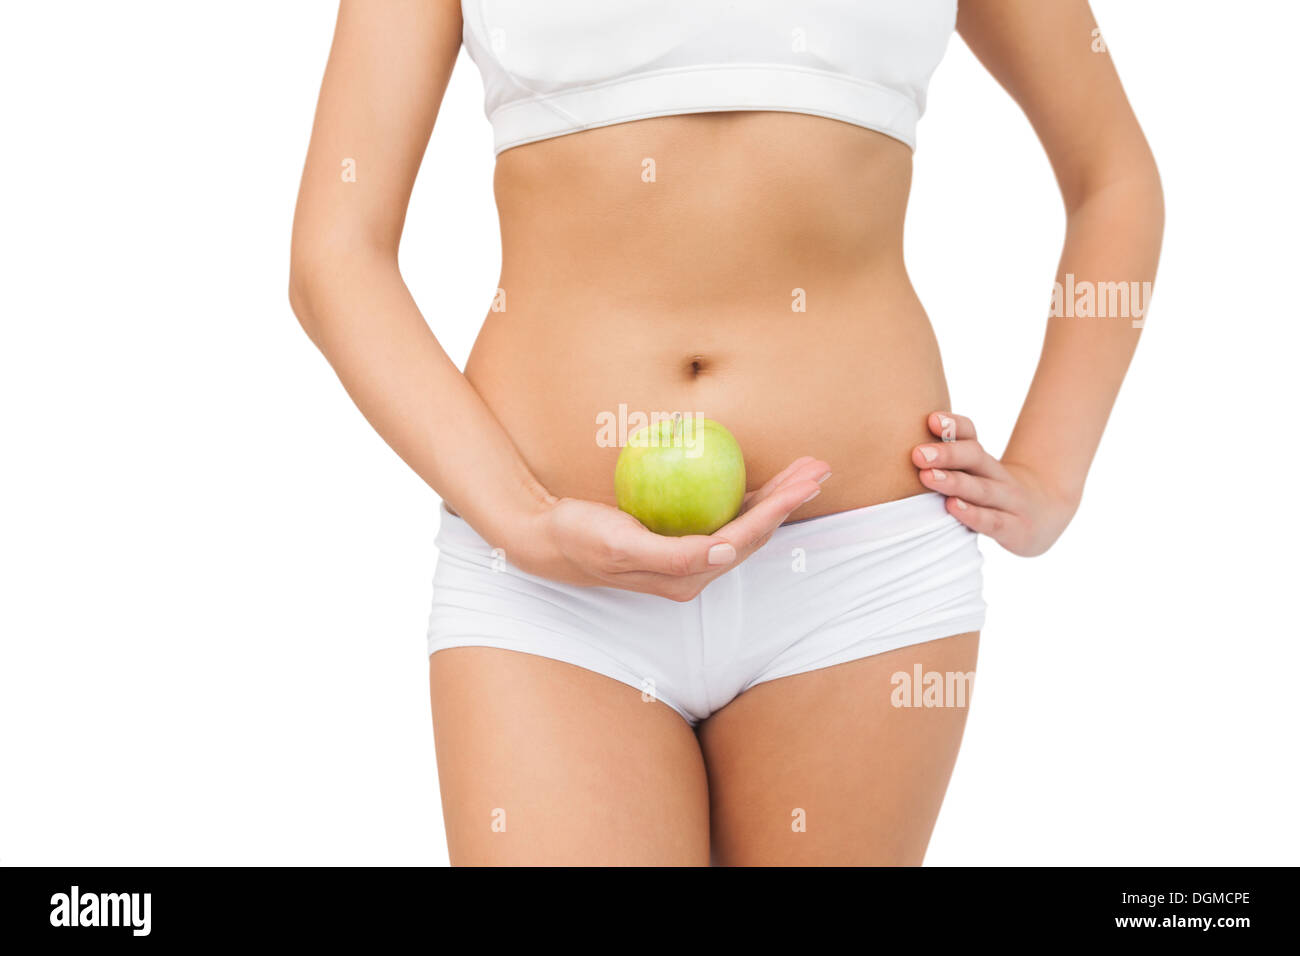 Young slim woman wearing a sports bra holding a green apple Stock Photo